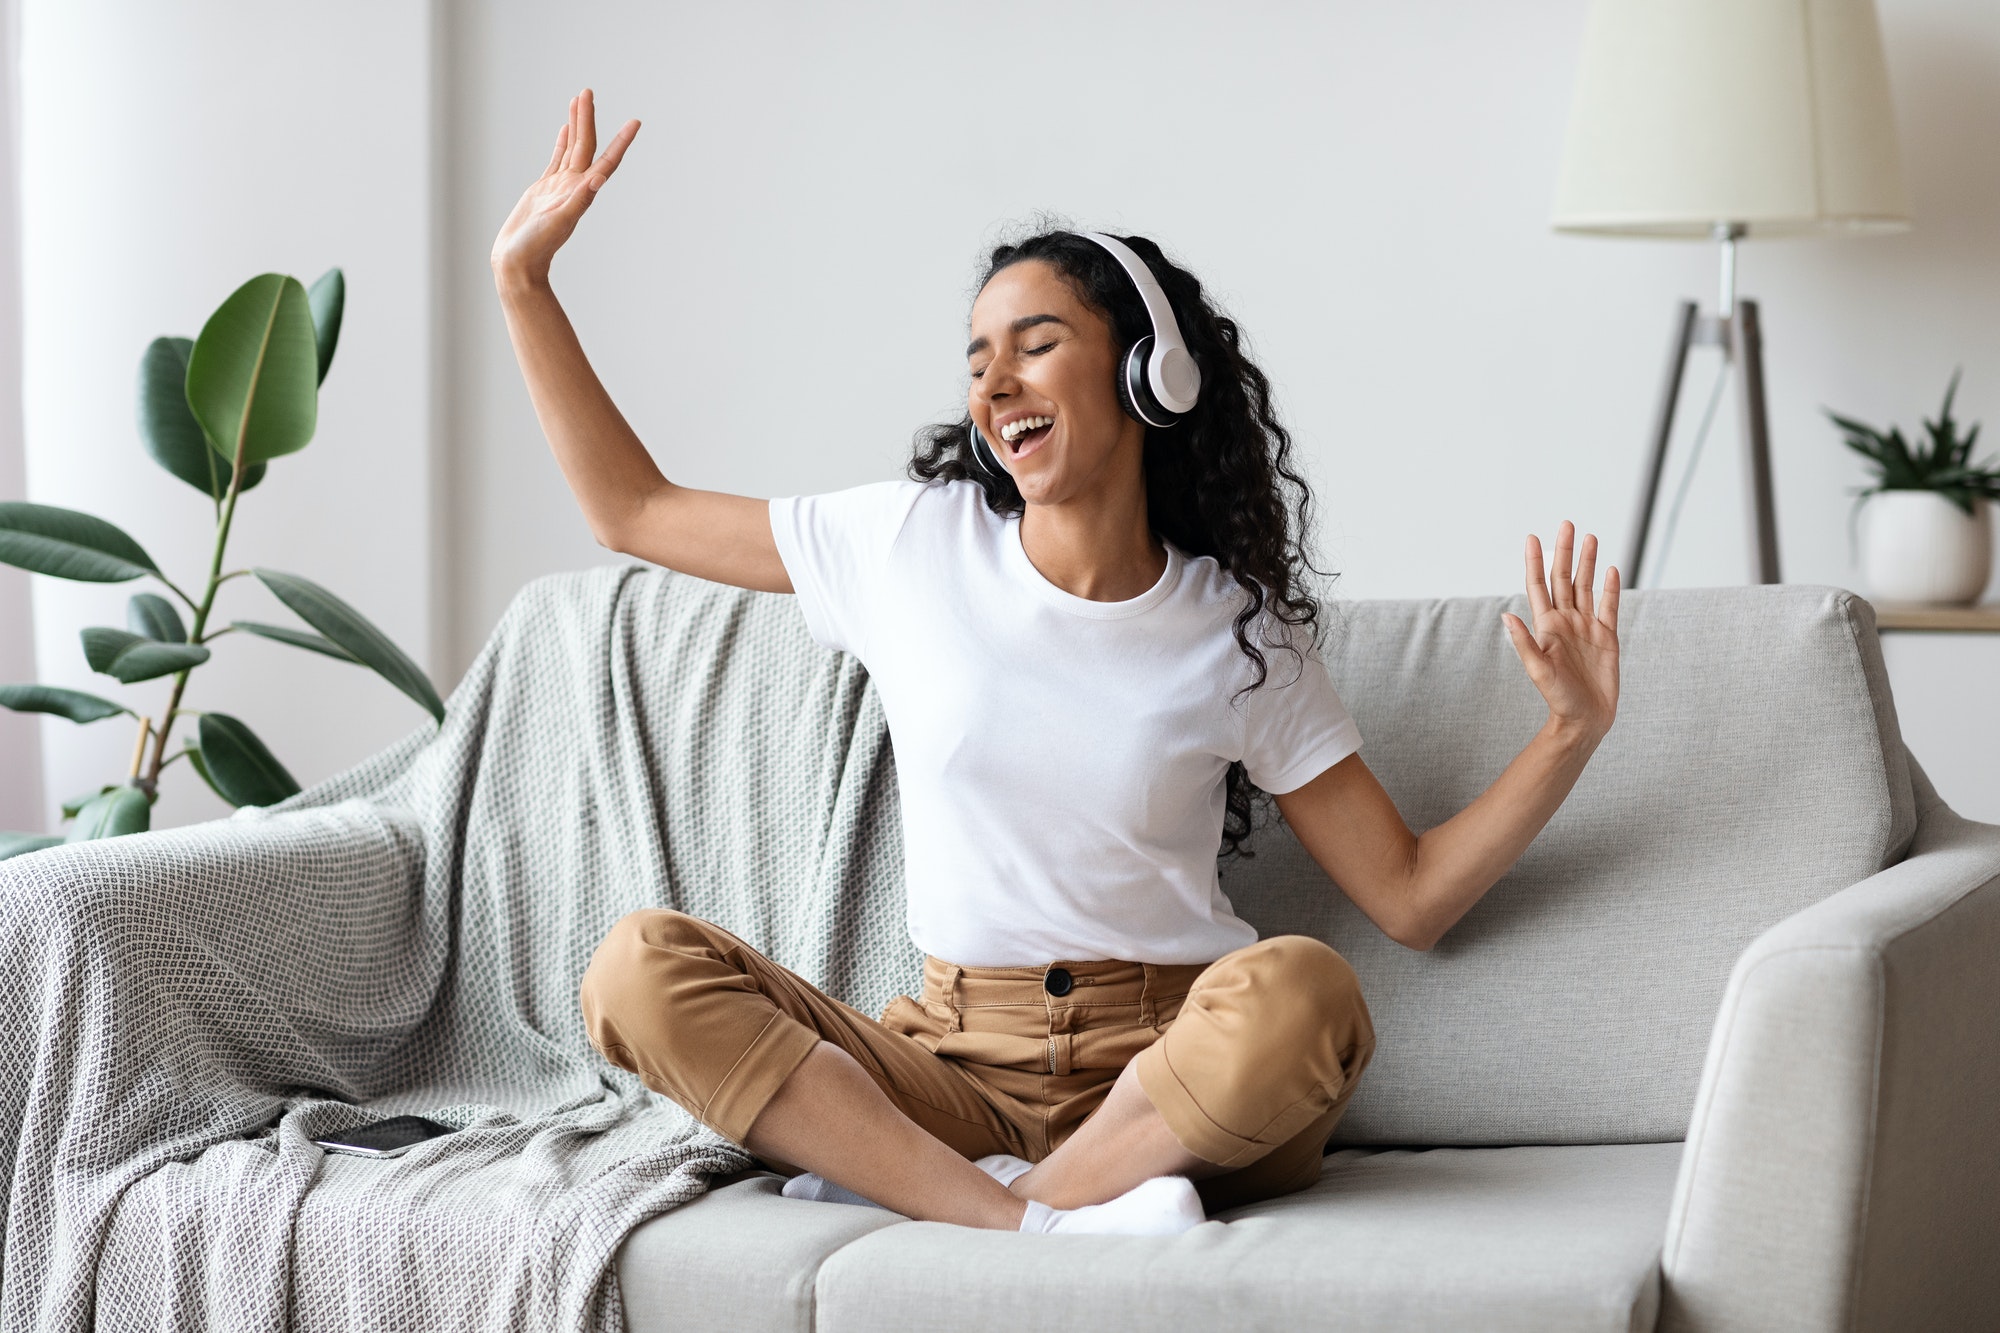 Carefree woman listening to music and singing, using headphones